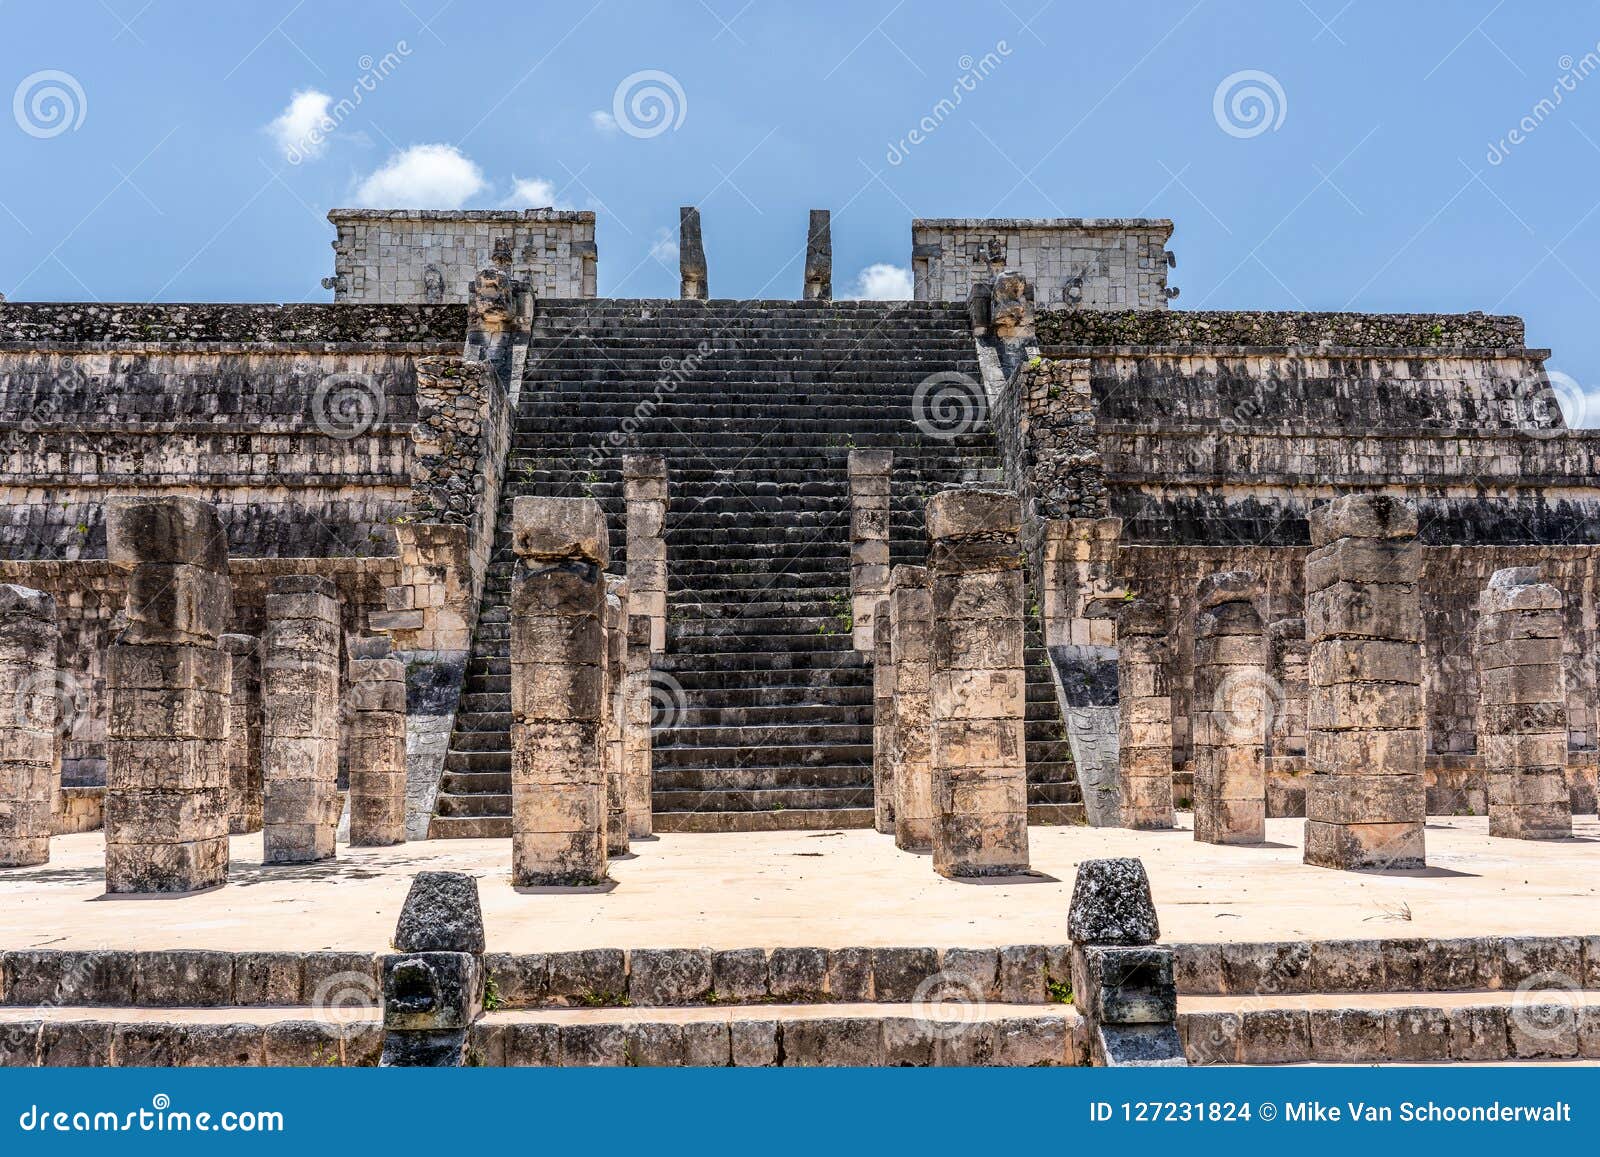 the famous temple of chichÃÂ©n itzÃÂ¡ in mexico